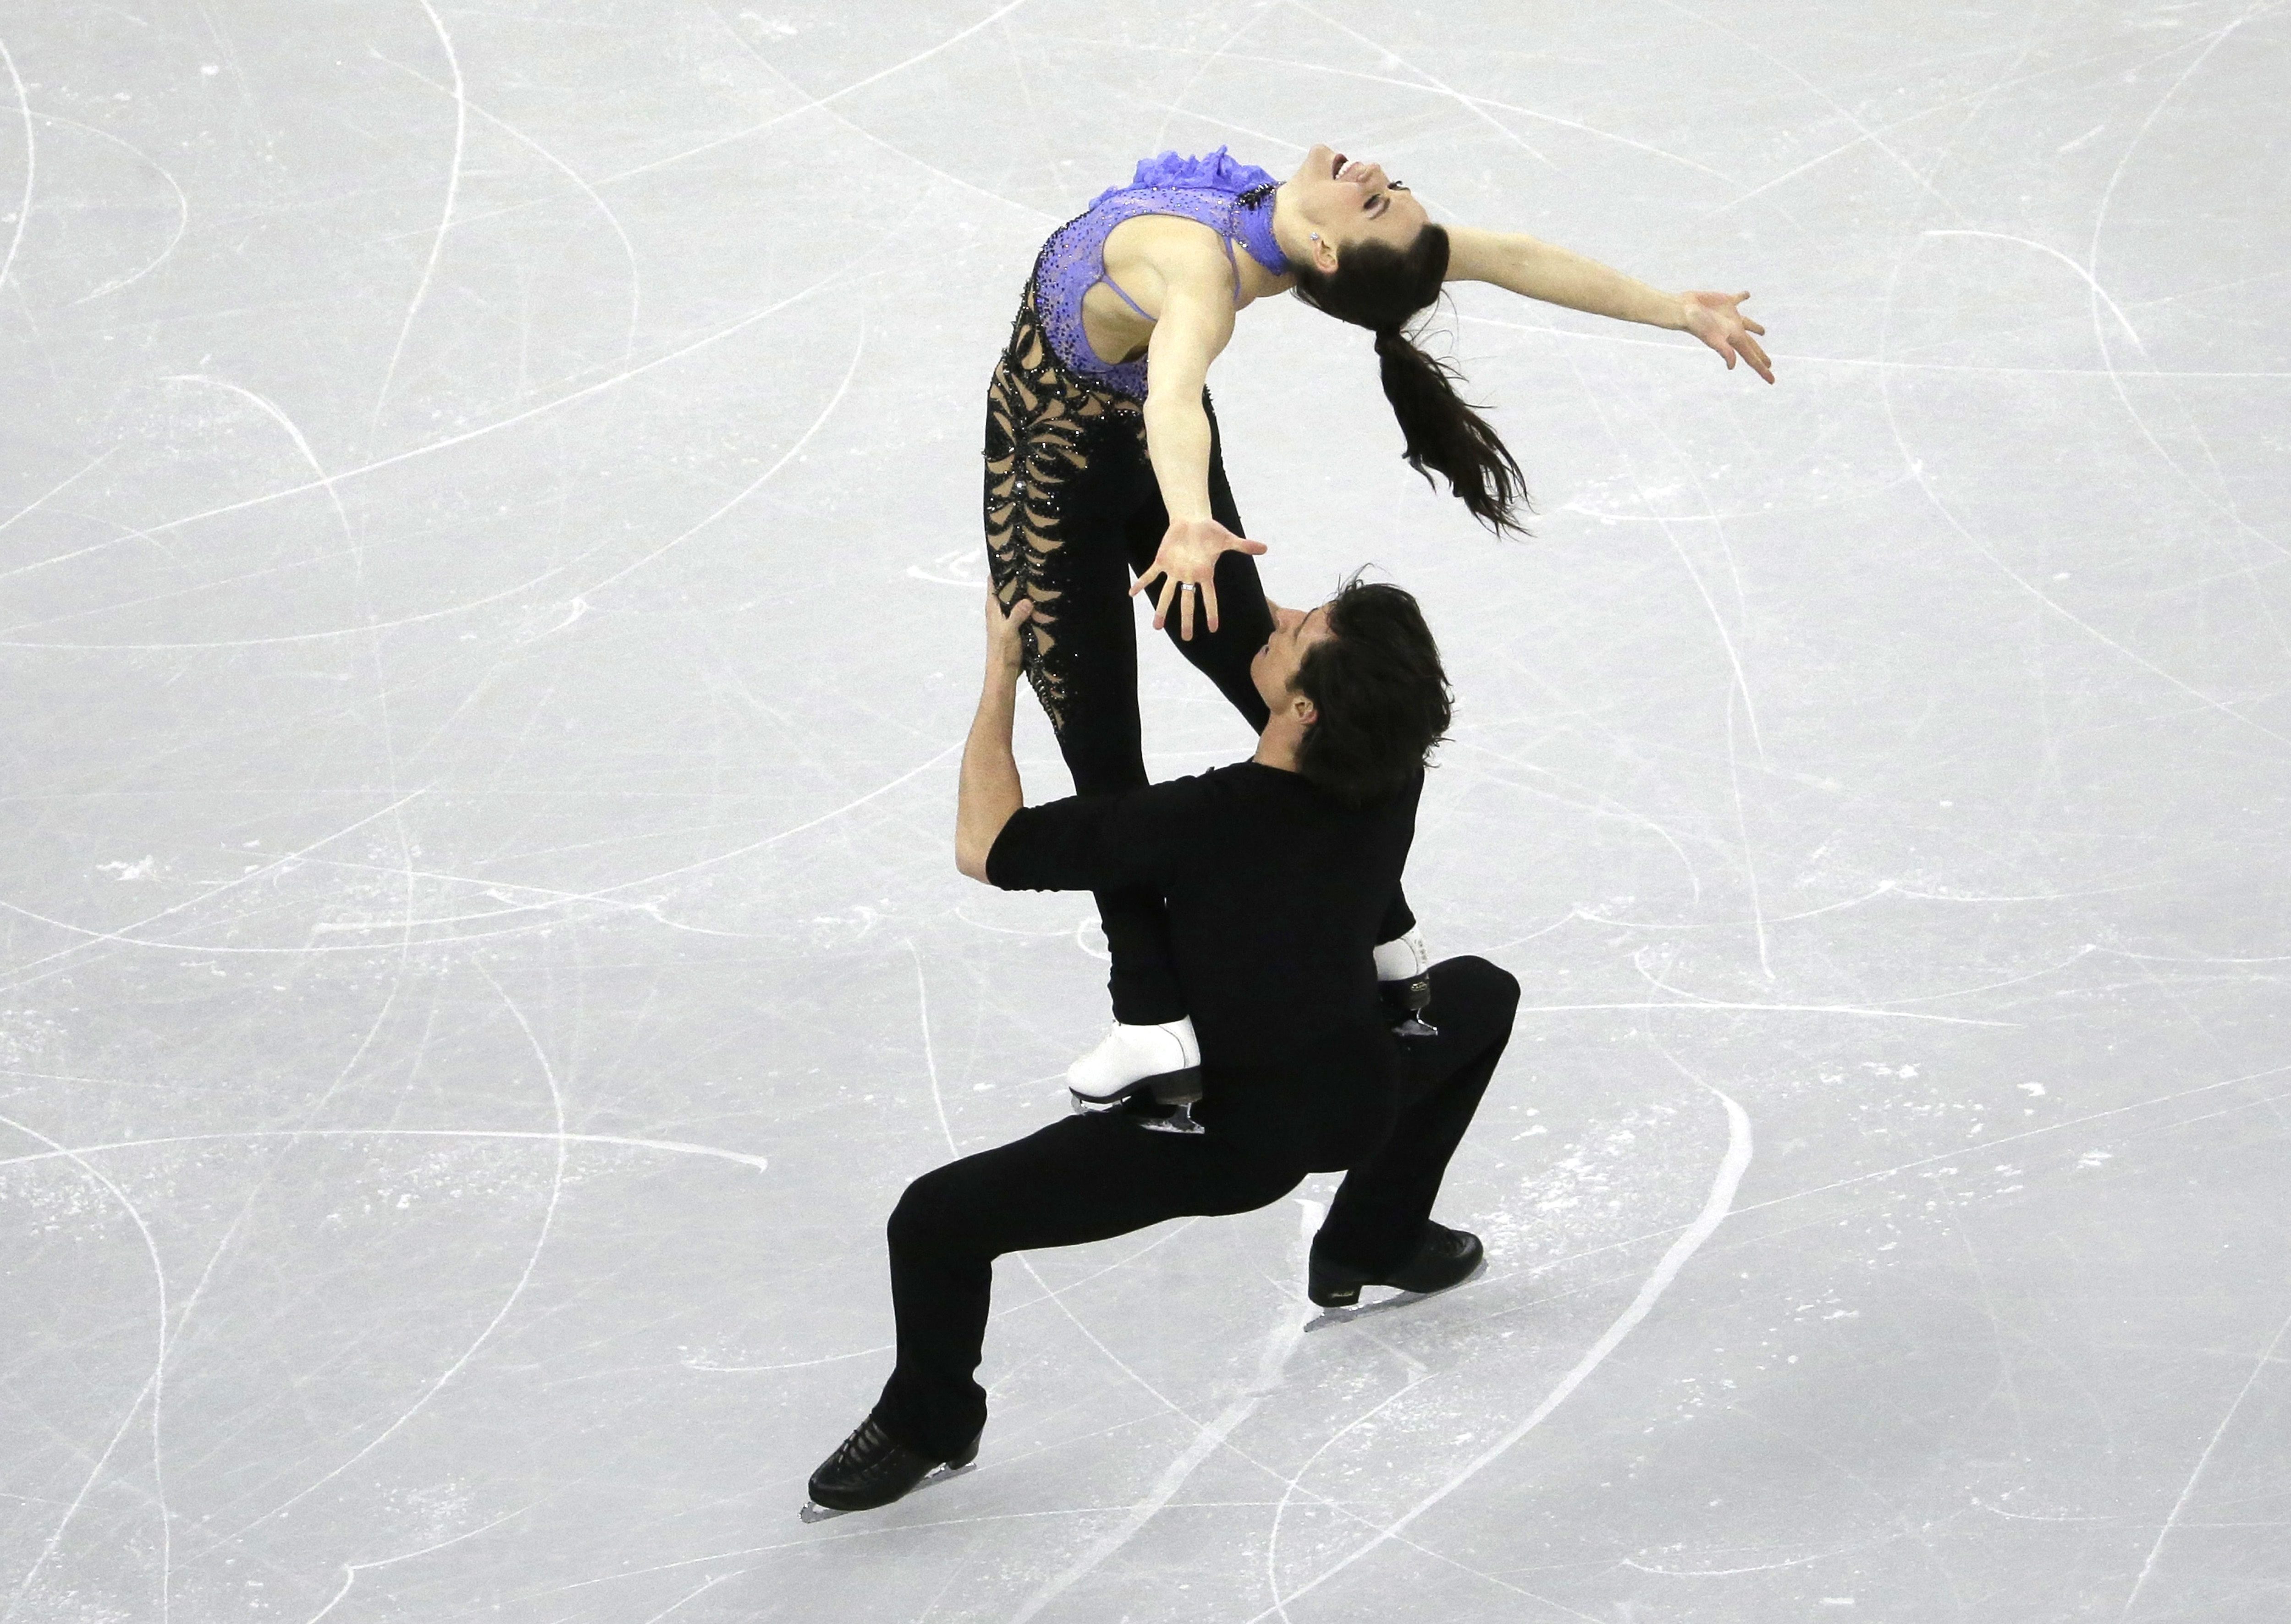 Tessa Virtue and Scott Moir from Canada perform in the Ice Dance Short Dance program at the ISU Four Continents Figure Skating Championships in Gangneung, South Korea, Thursday, Feb. 16, 2017. (AP Photo/Ahn Young-joon)